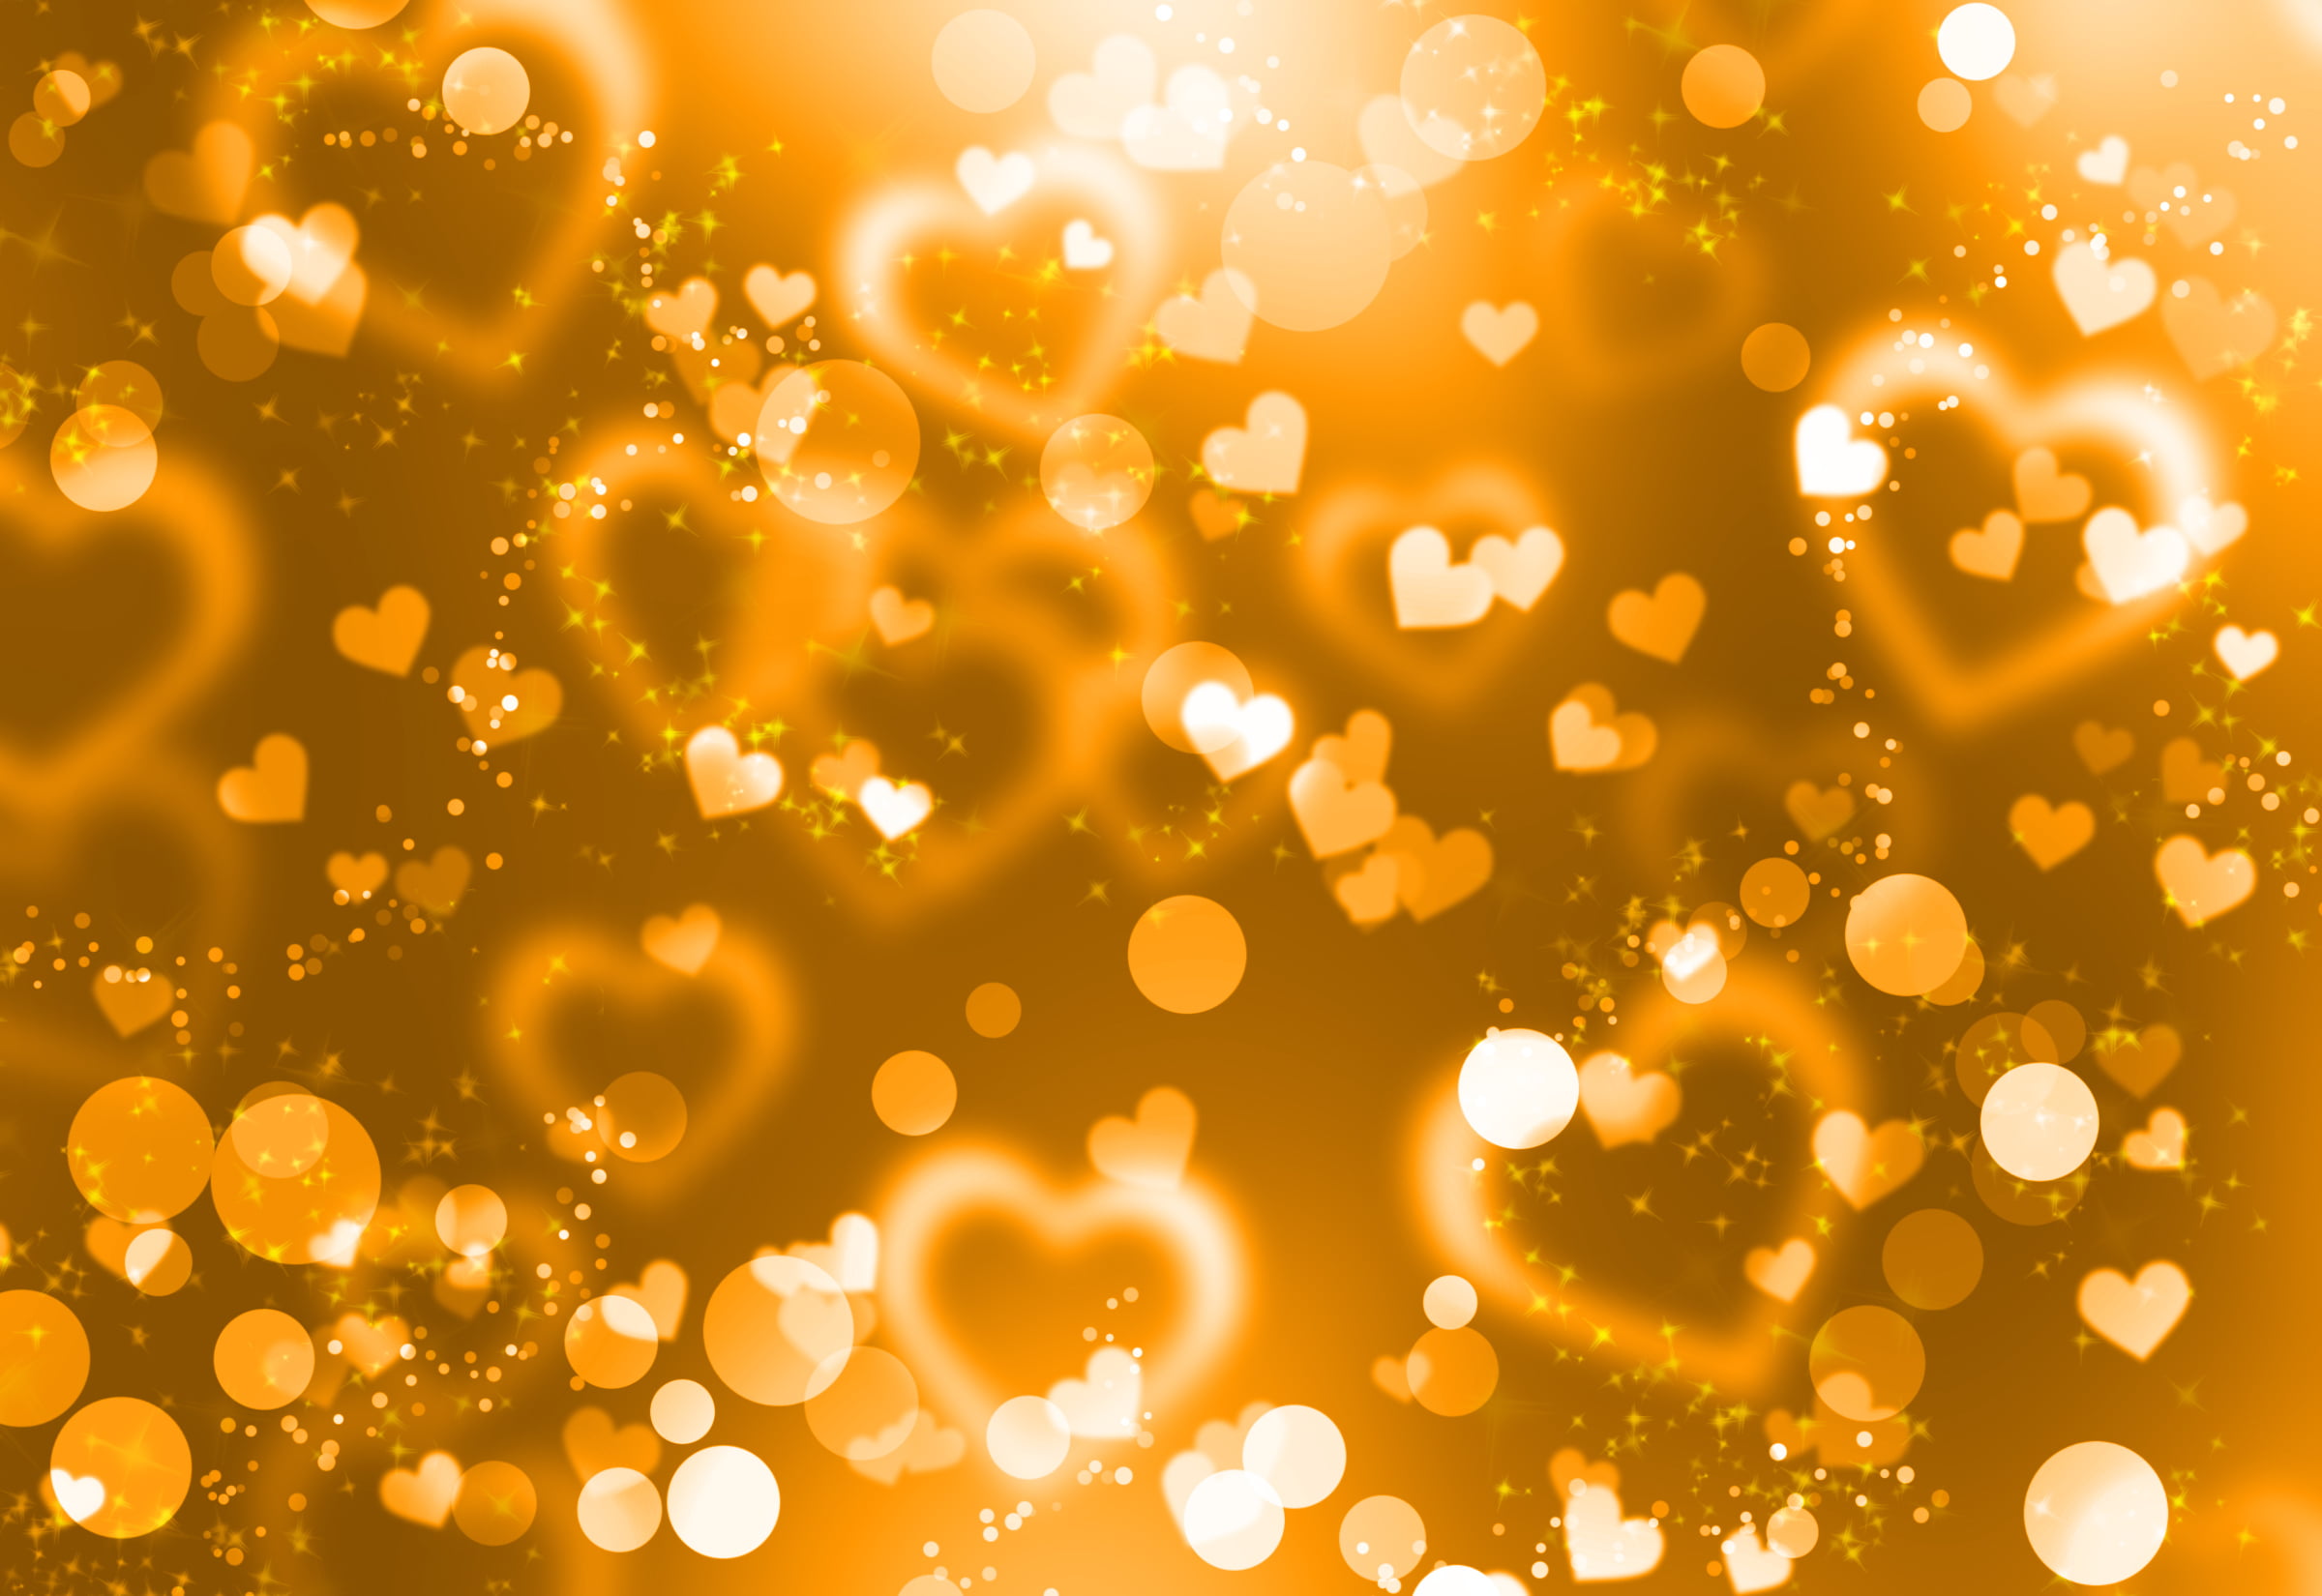 yellow hearts wallpaper, background, gold, backgrounds, abstract